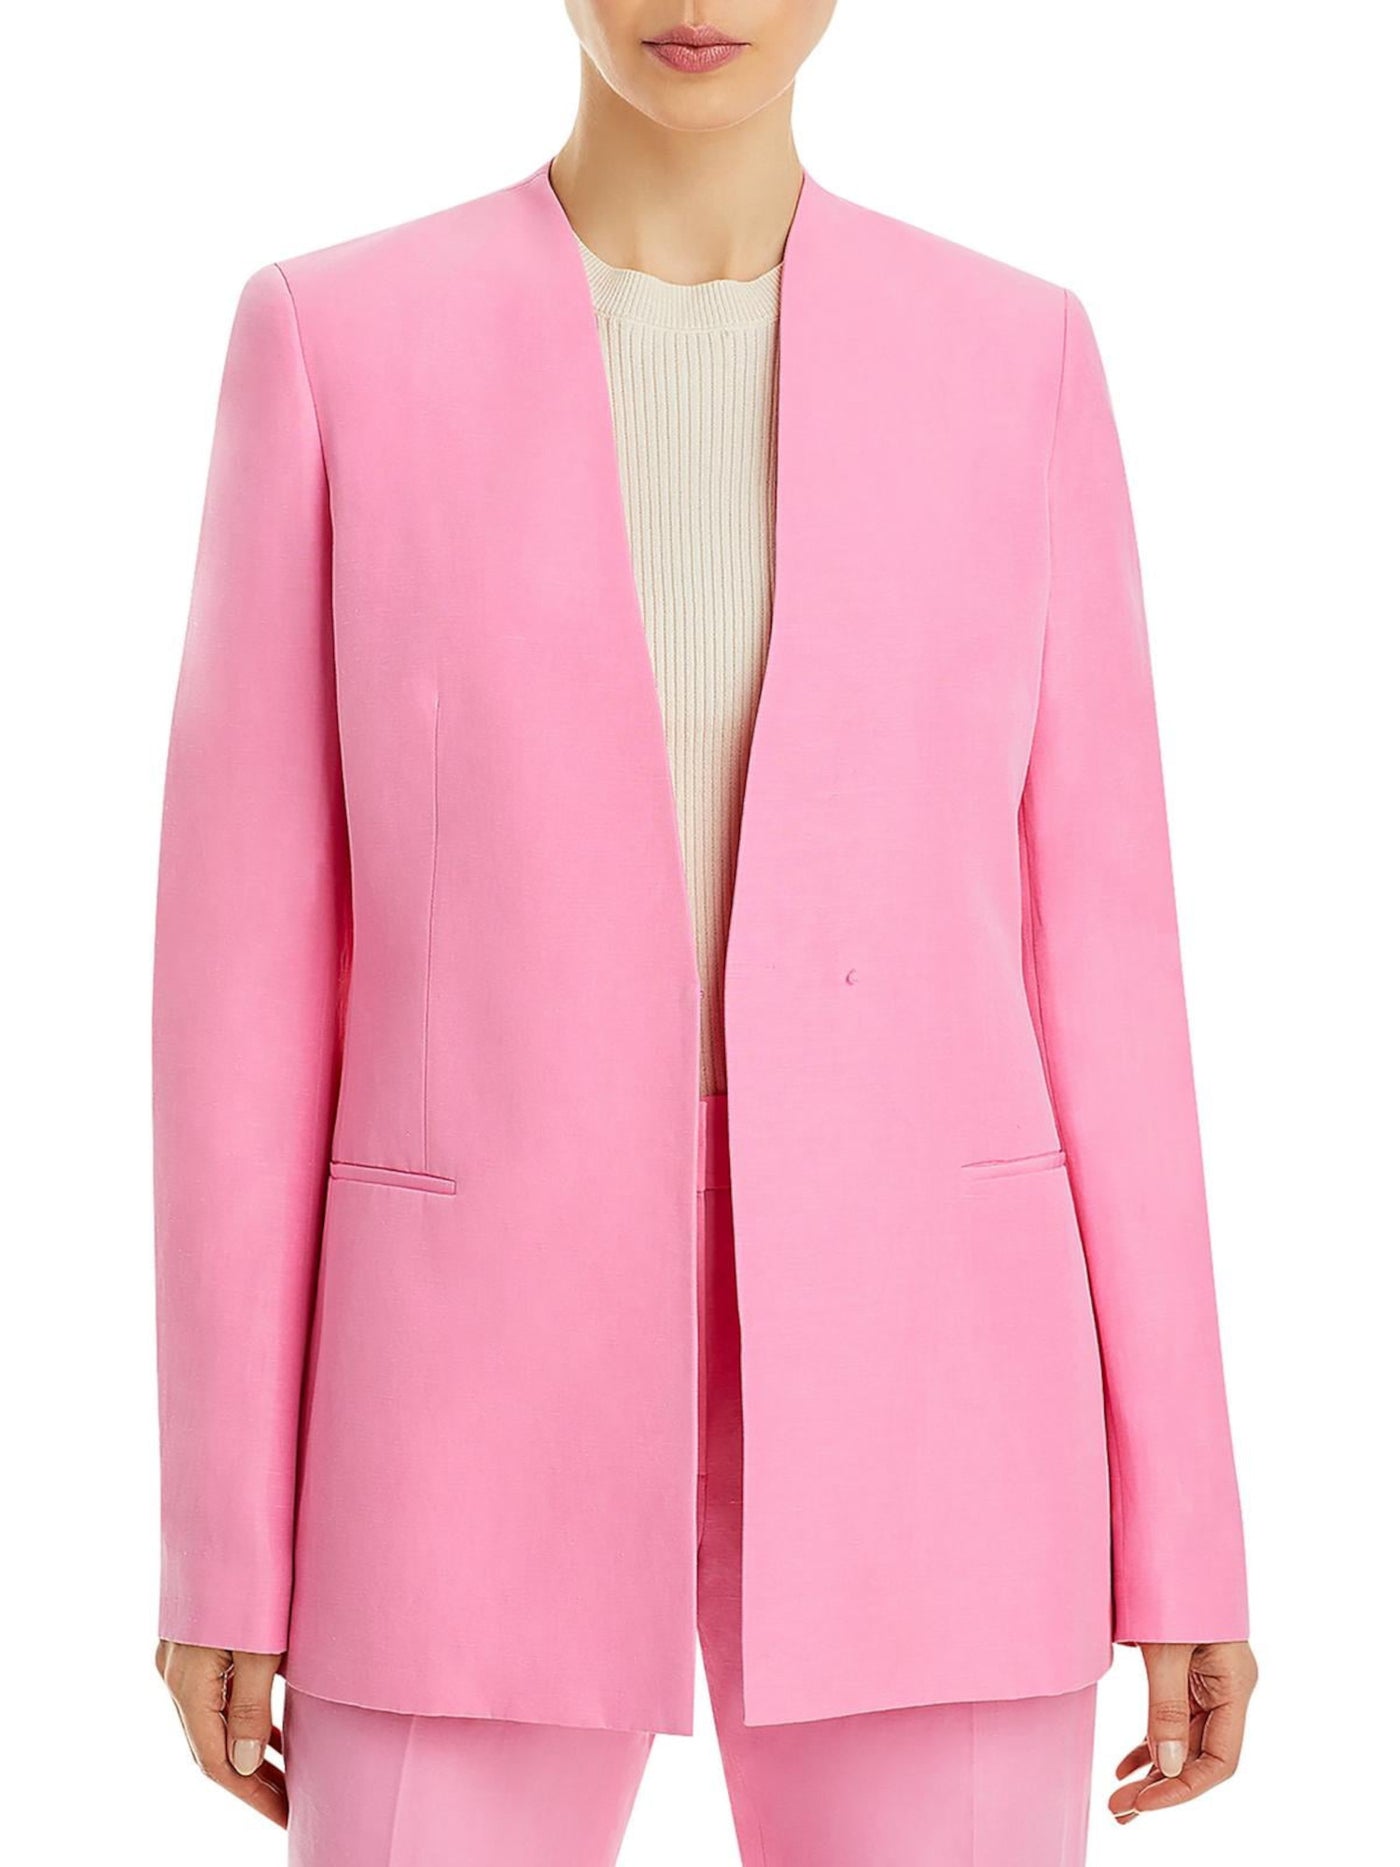 LAFAYETTE 148 NEW YORK Womens Pink Pocketed Lined Hook And Eye Closure Vented Back Wear To Work Blazer Jacket 0